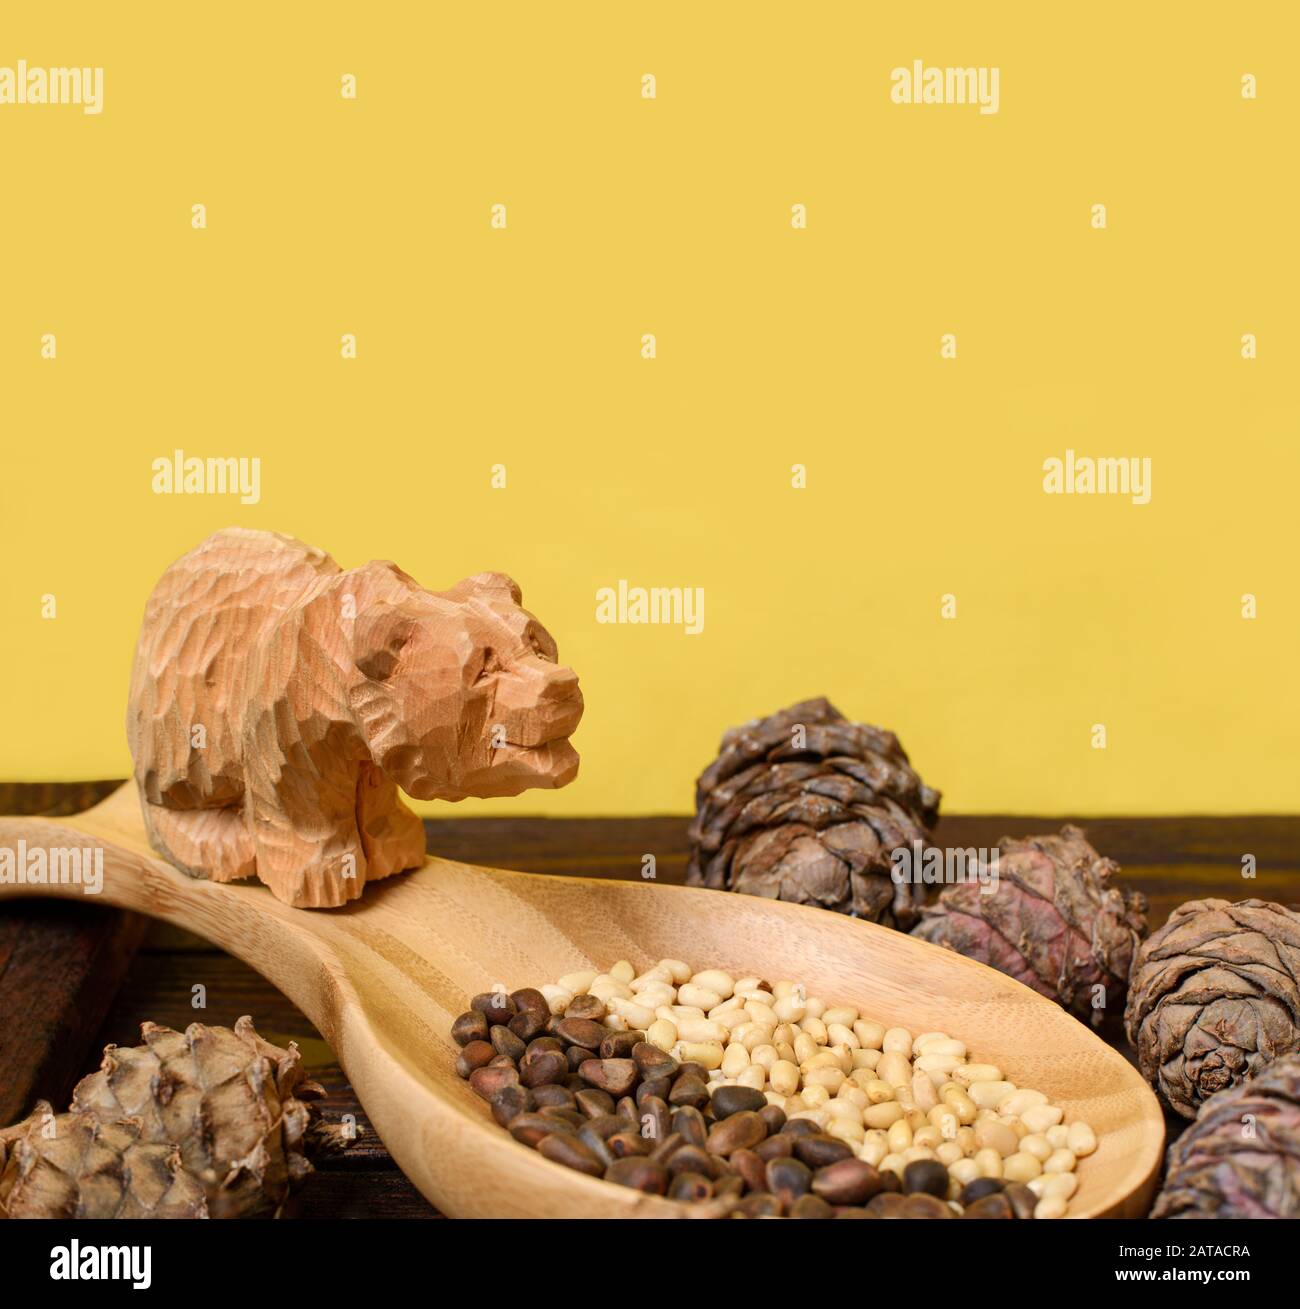 Pine nuts. Cedar nuts and cones on wooden table. Wooden bear made of cedar on yellow background. Кедровые орешки. Кедровые шишки. Деревянный медведь. Stock Photo